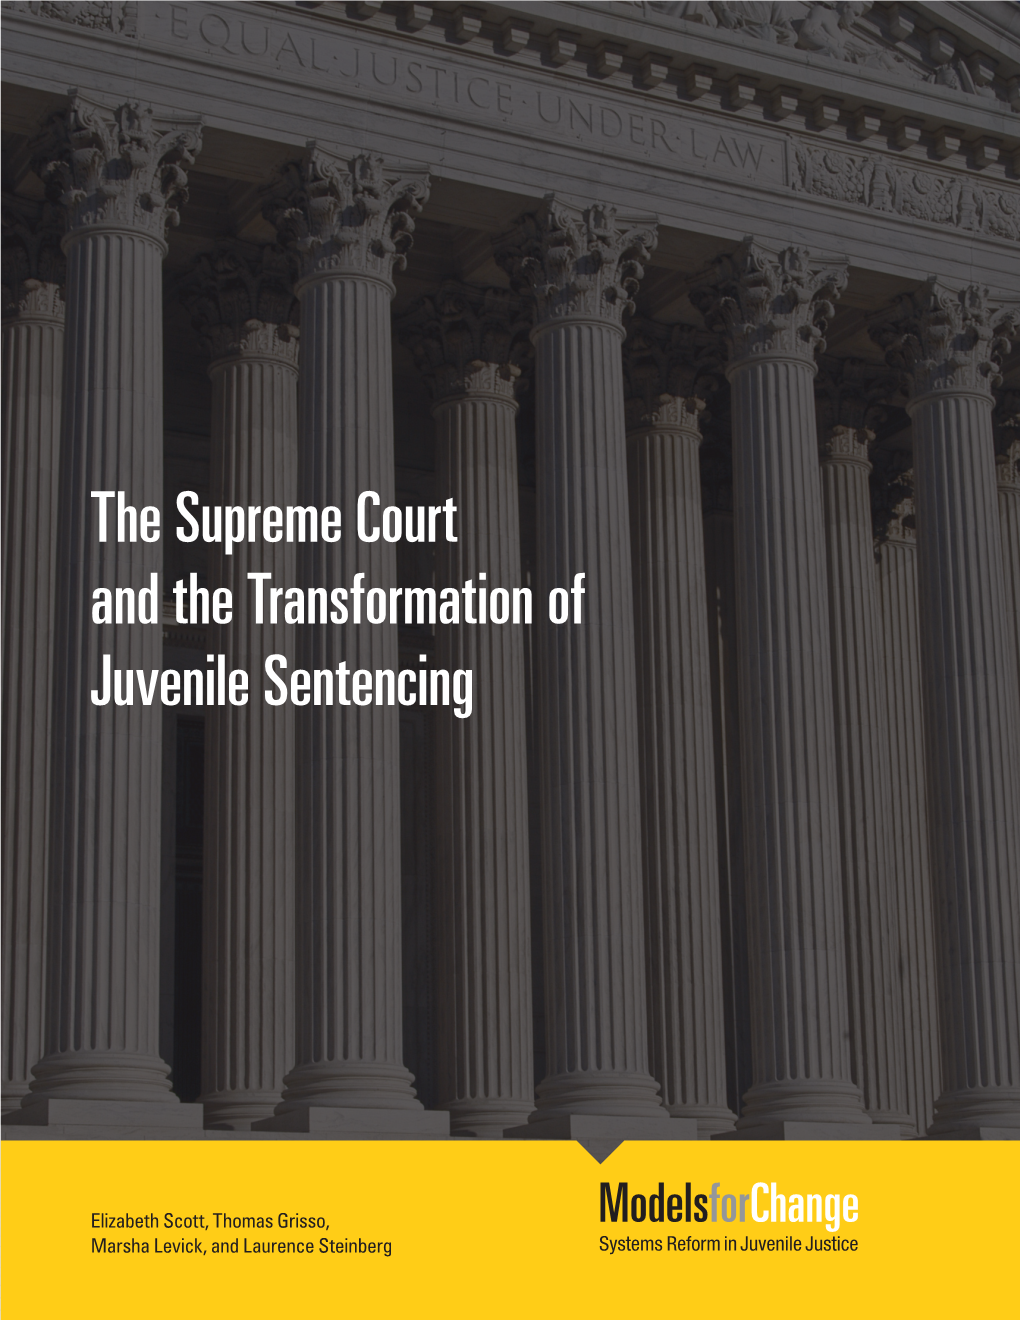 The Supreme Court and the Transformation of Juvenile Sentencing